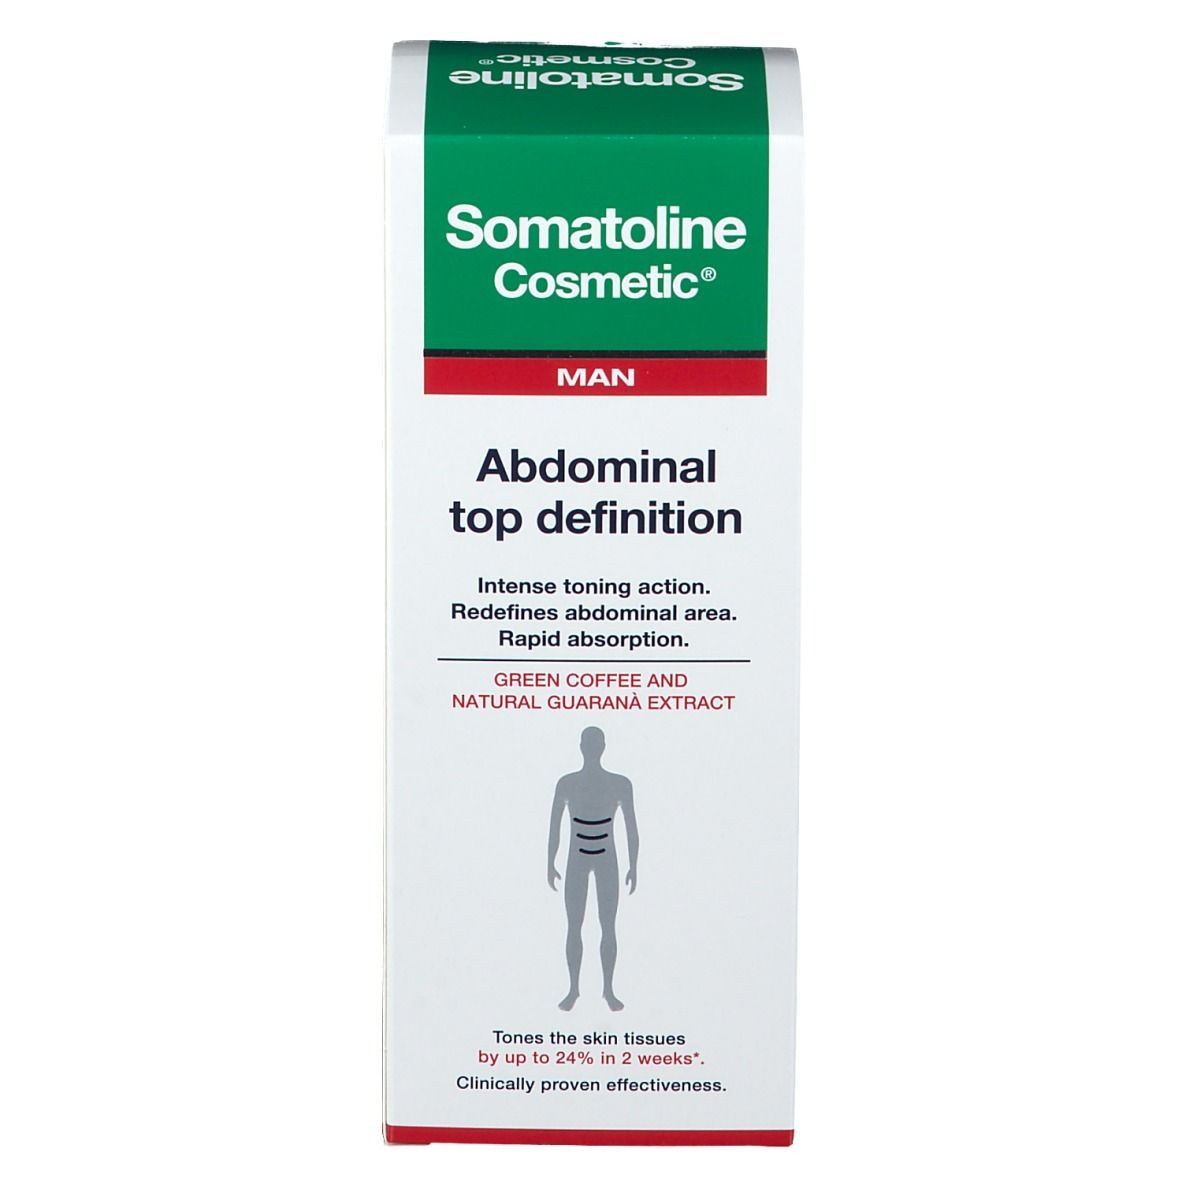 Somatoline Cosmetic® Homme abdominaux top définition